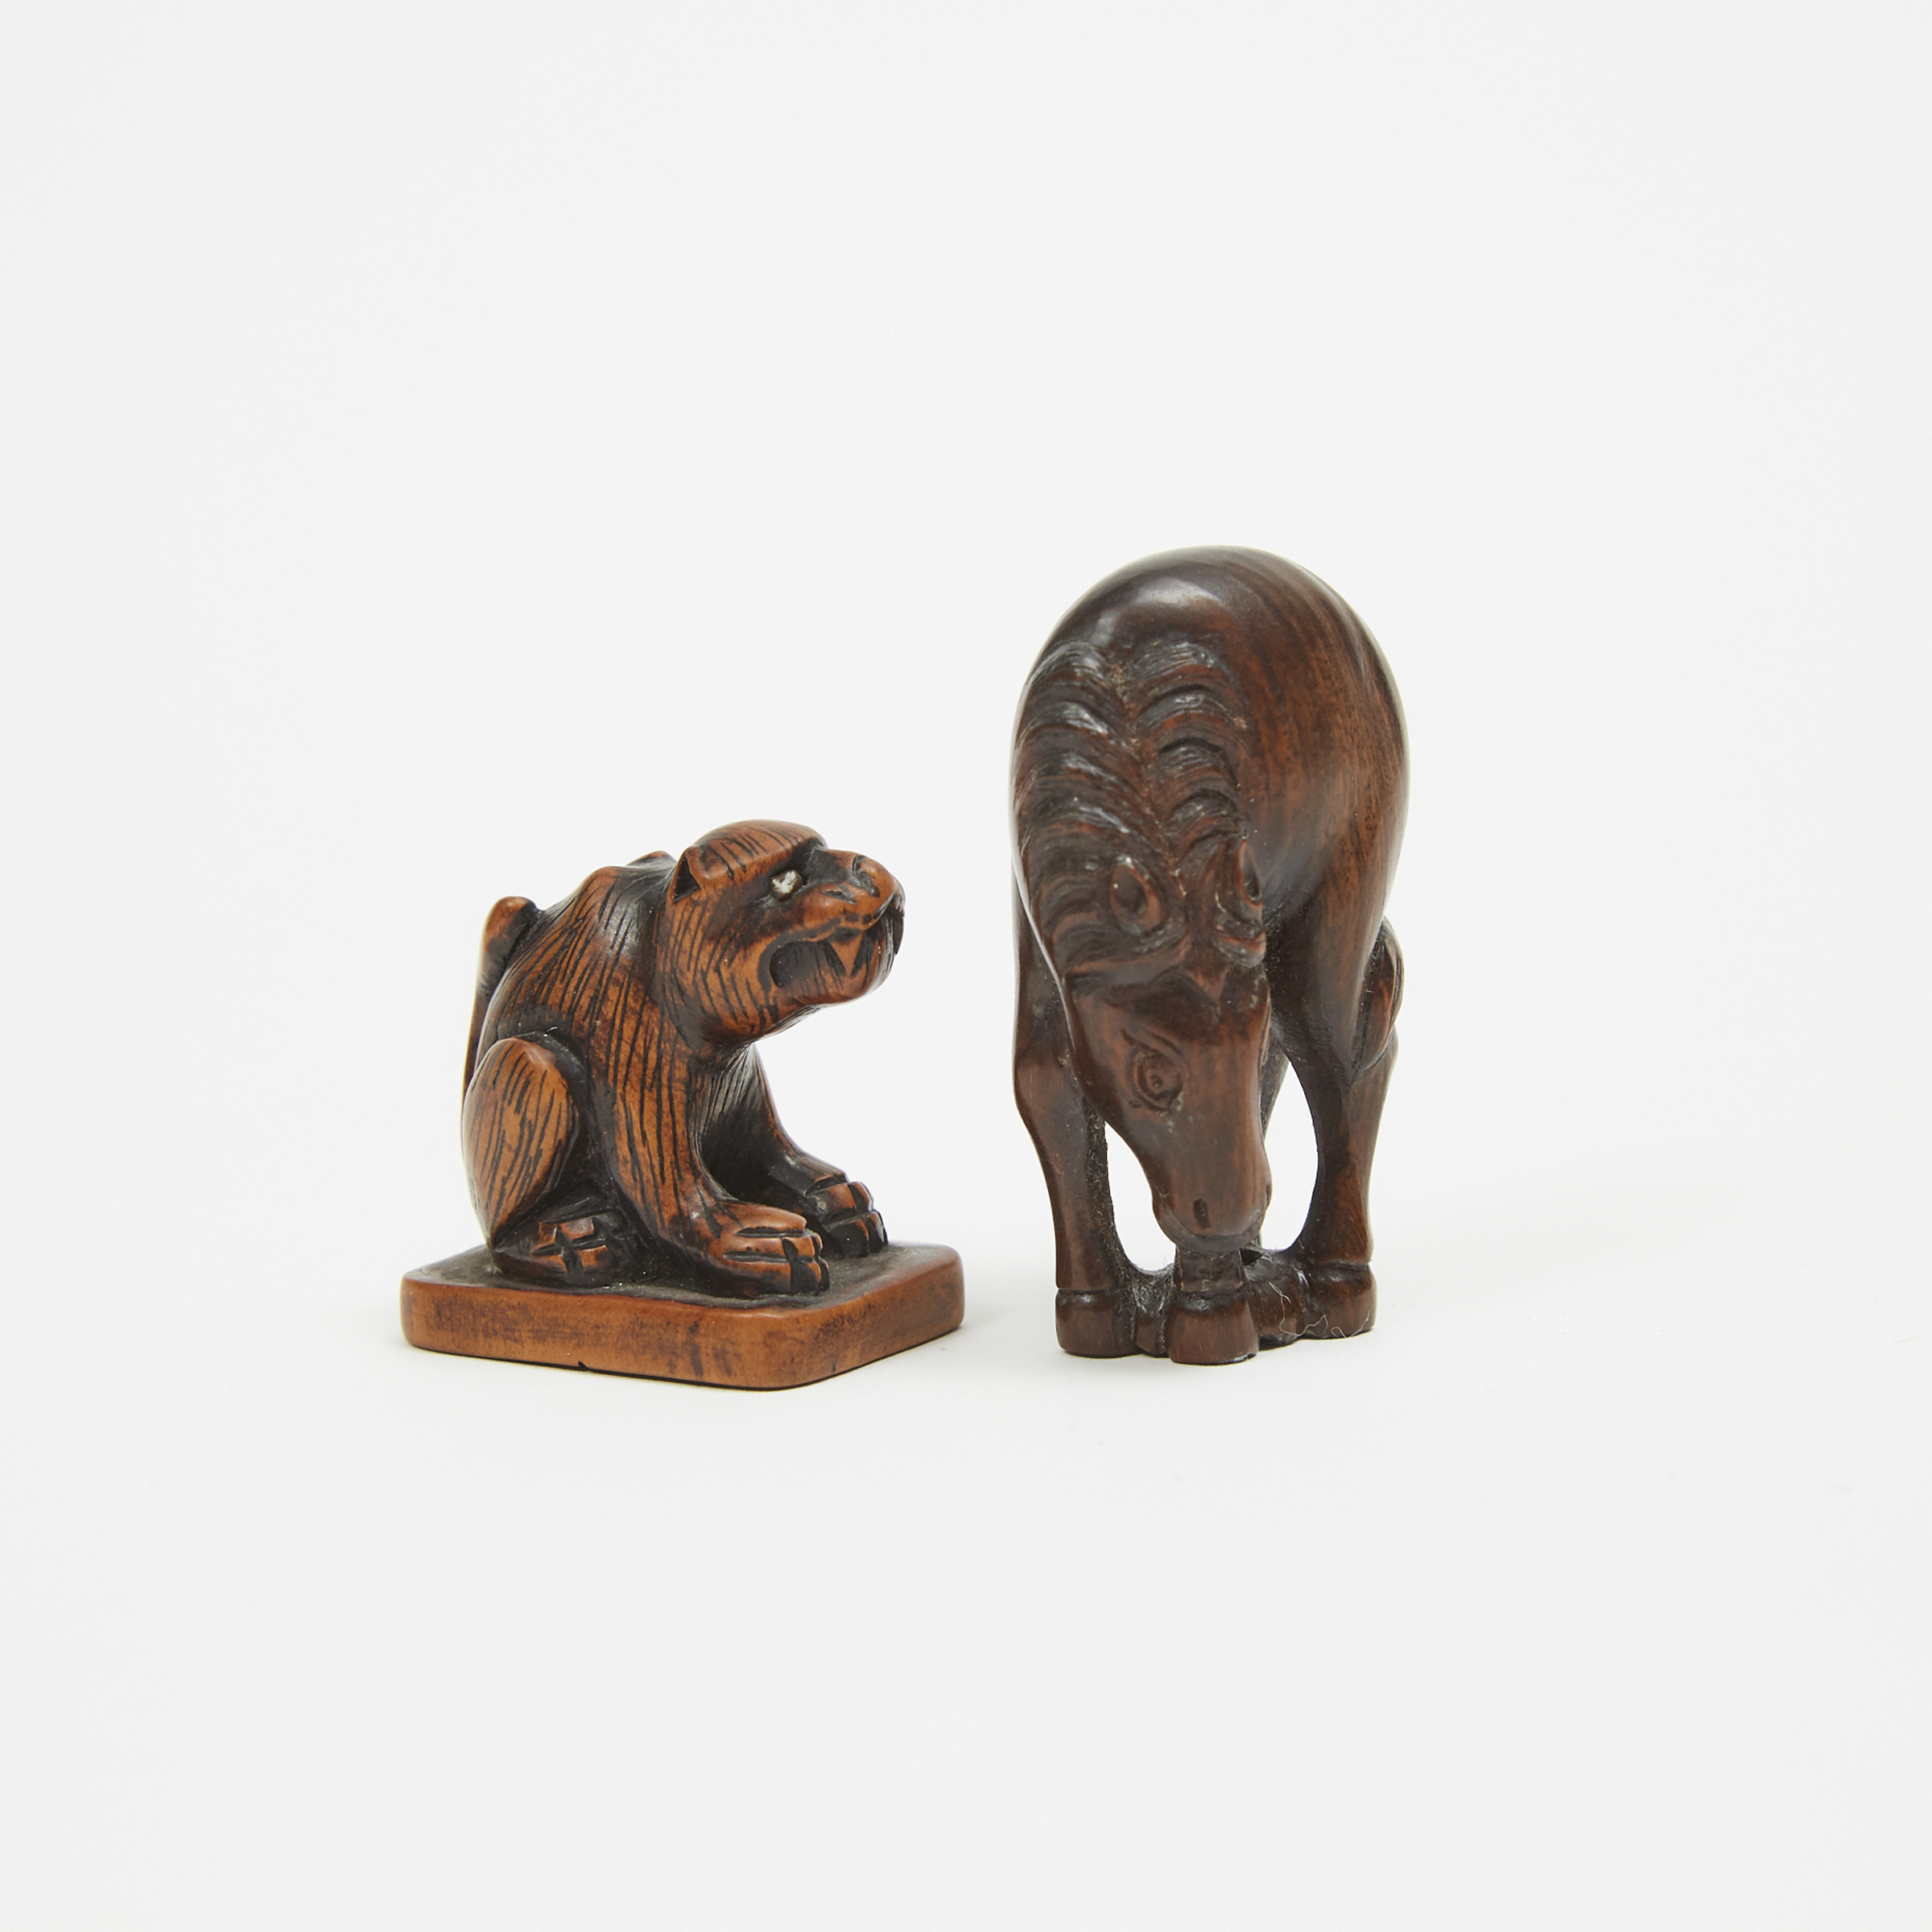 Two Wood Carved Animal Netsuke, One Signed Tamaichi, Possibly 19th Century